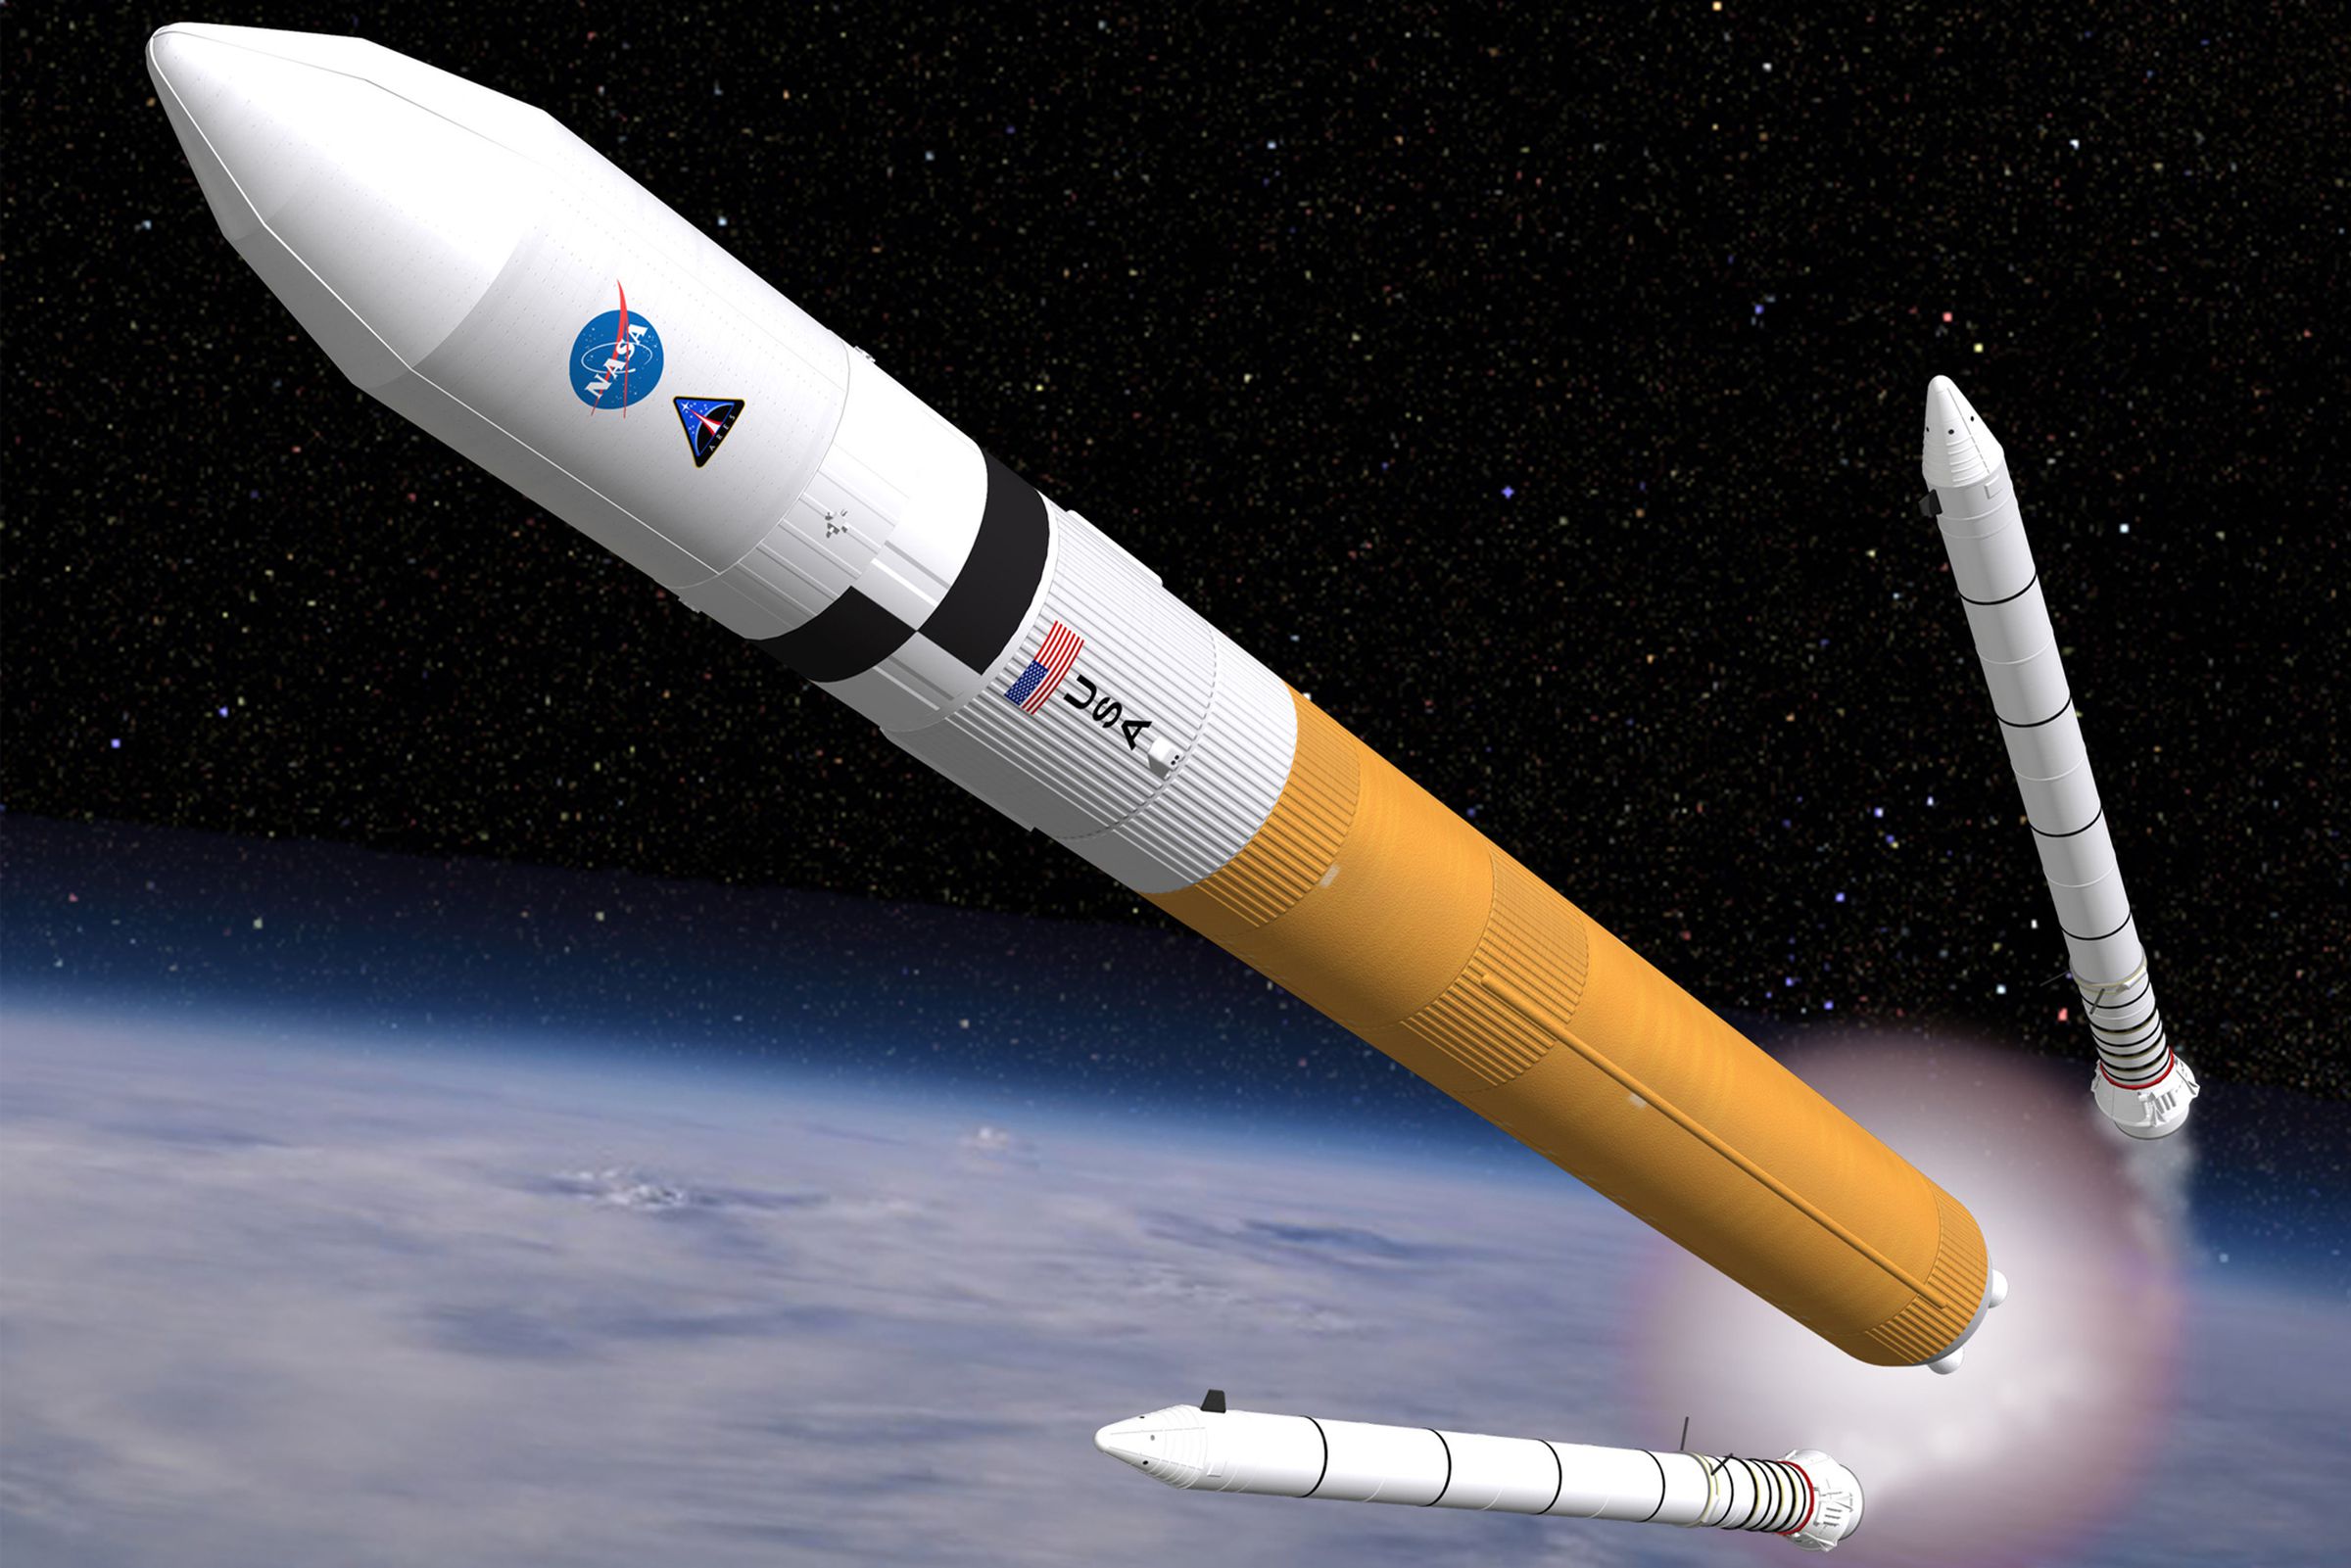 An artistic rendering of Ares V, which was proposed for the Constellation program